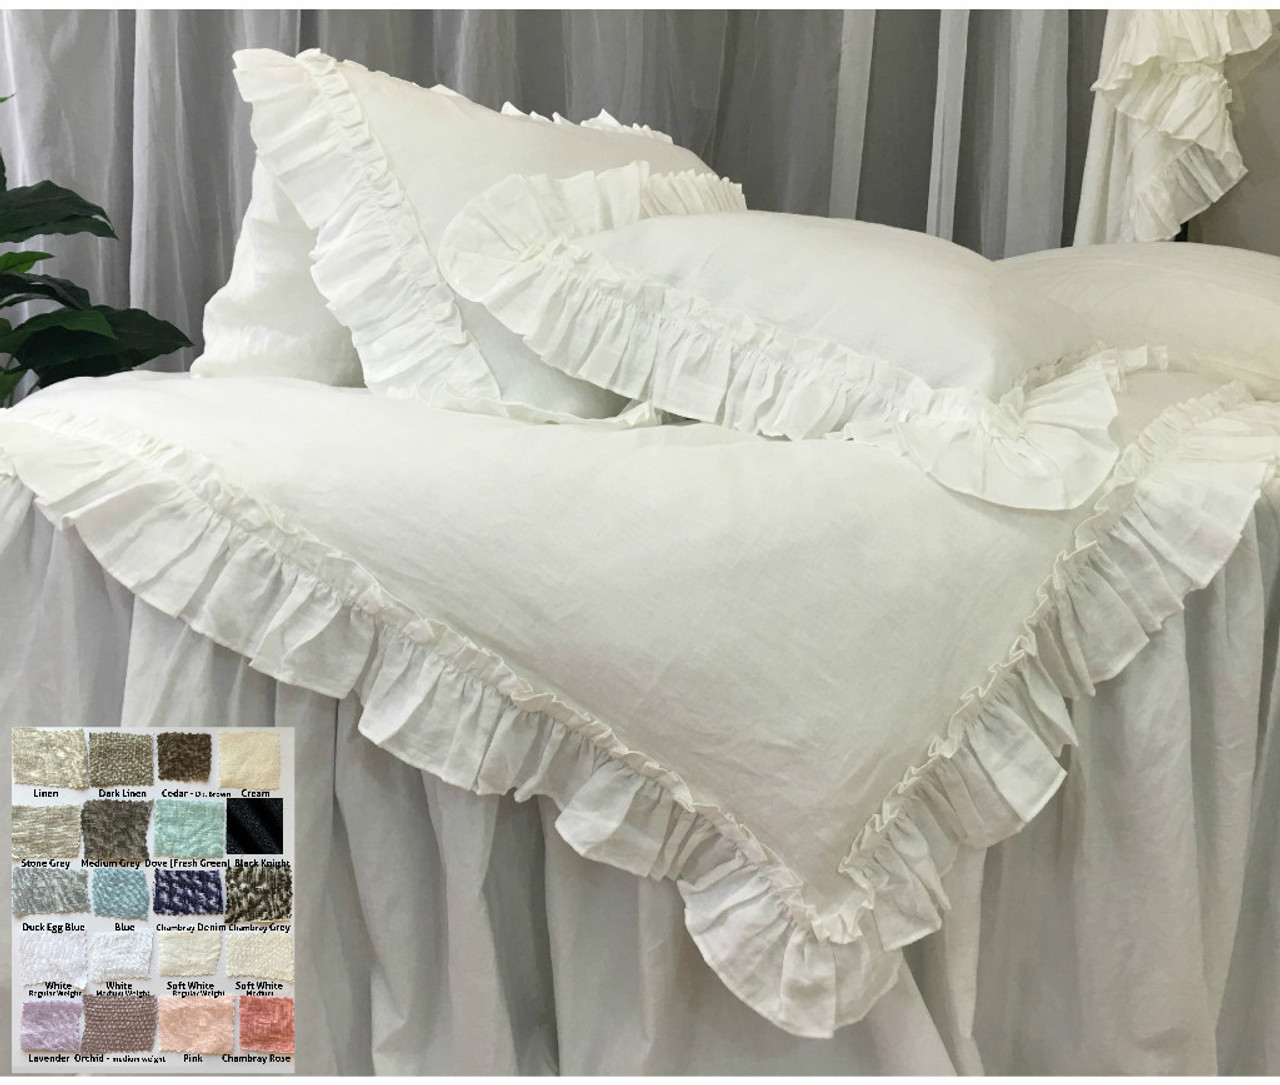 Linen Duvet Cover With Vintage Ruffles Style 40 Colors Patterns